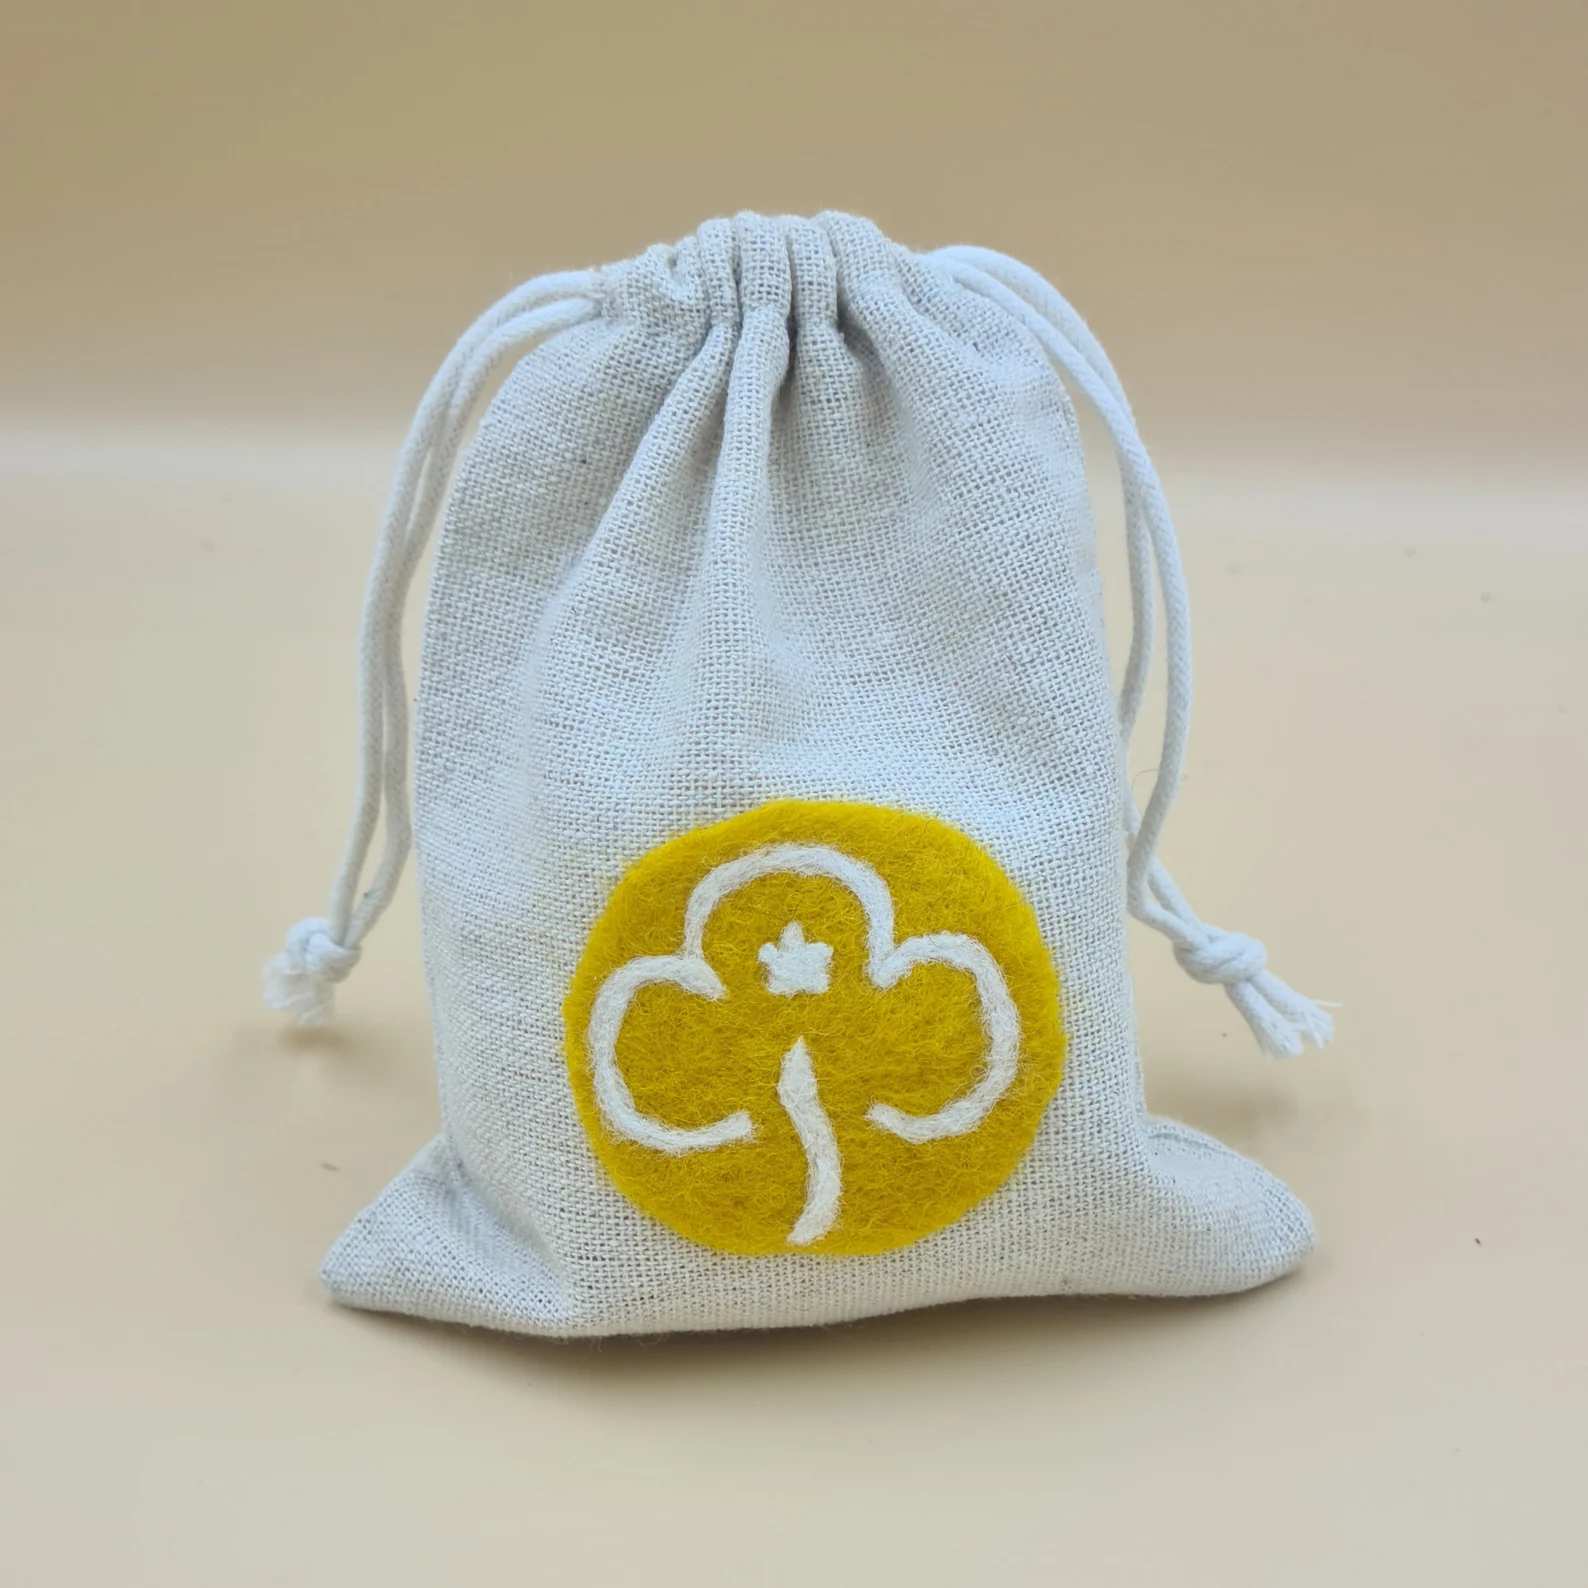 Cotton drawstring bag featuring needle felted Girlguiding Brownies trefoil.